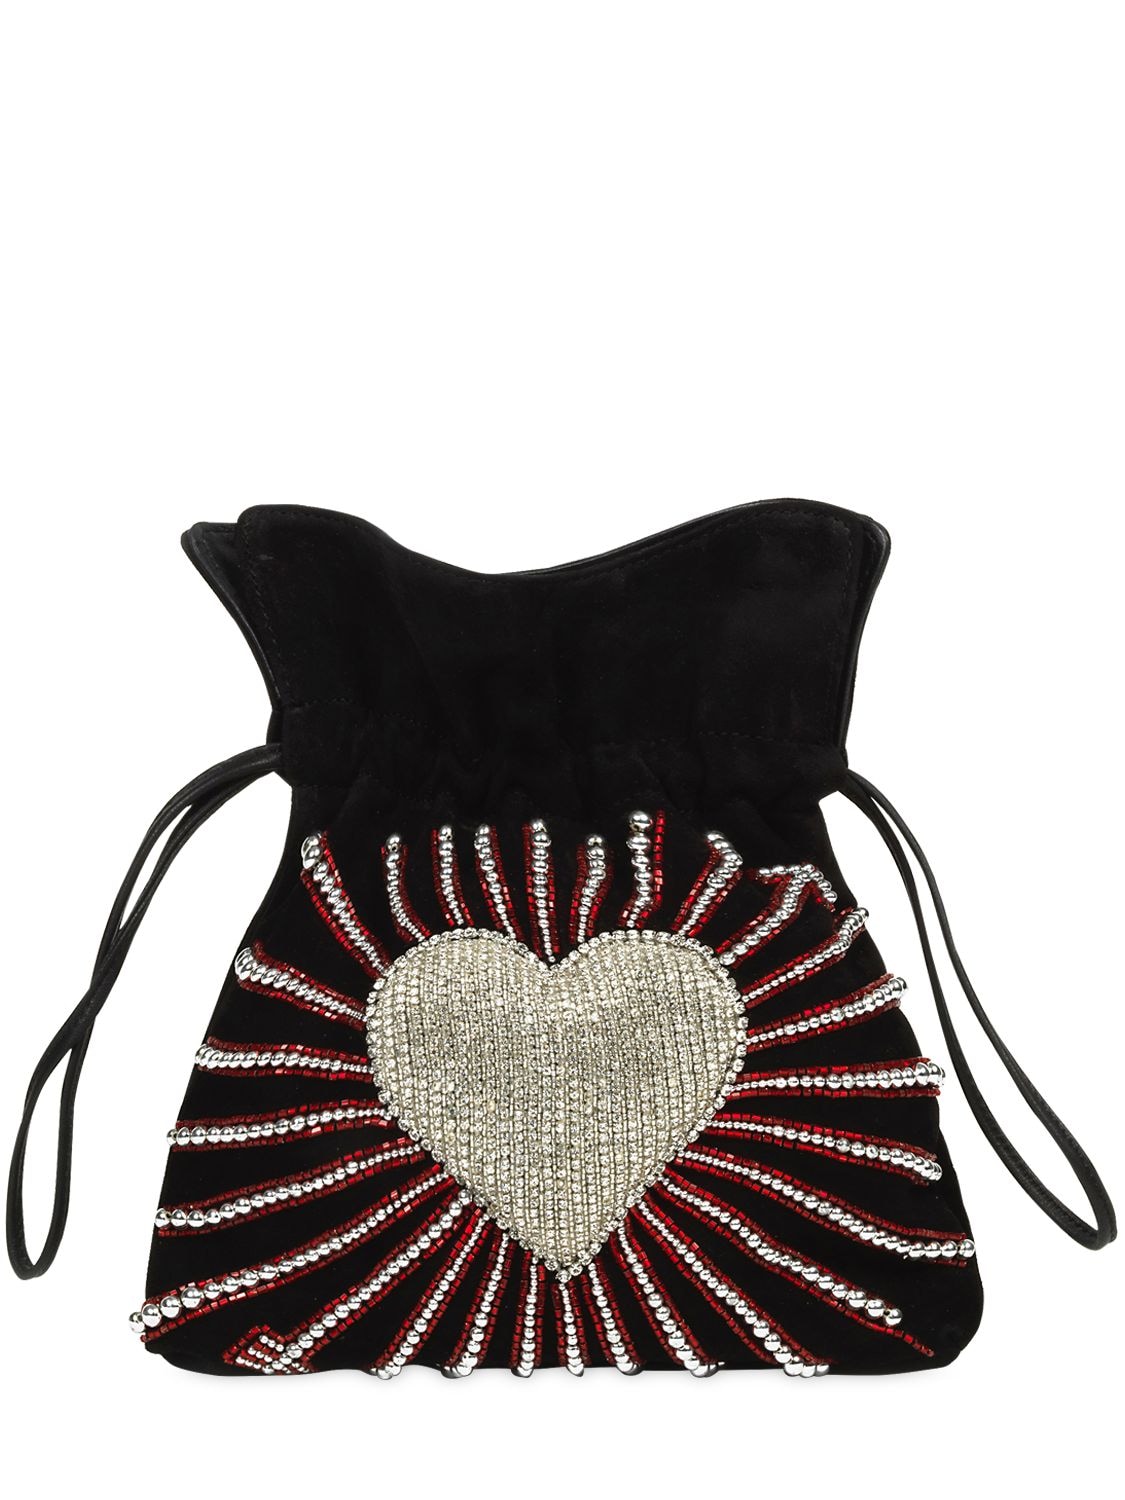 Les Petits Joueurs Trilly Heart Embellished Leather Bag In Black